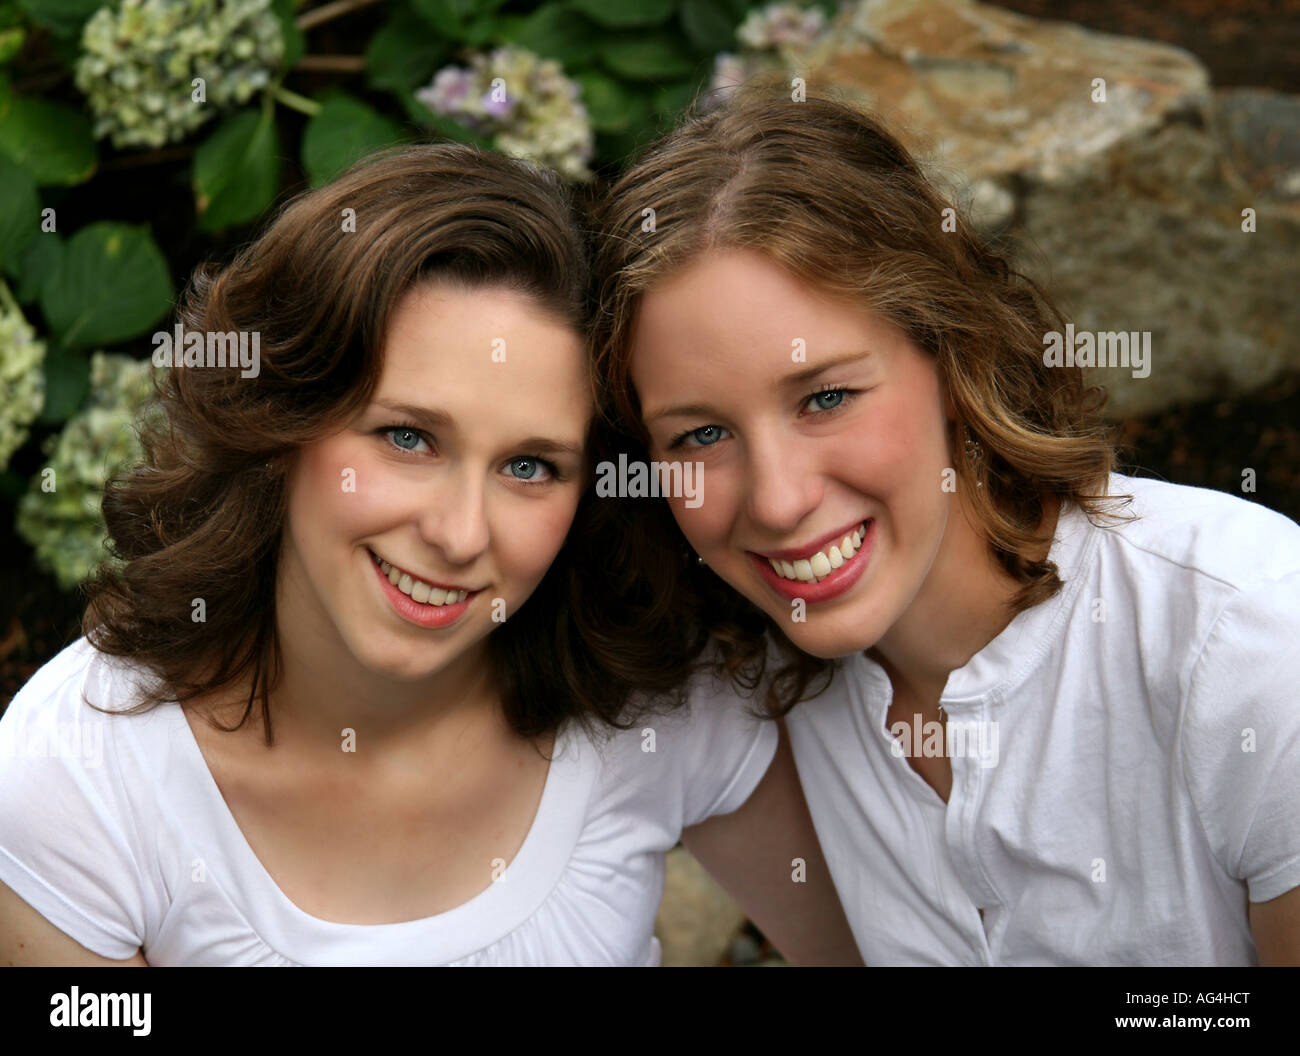 teen girls and fraternal twins Stock Photo